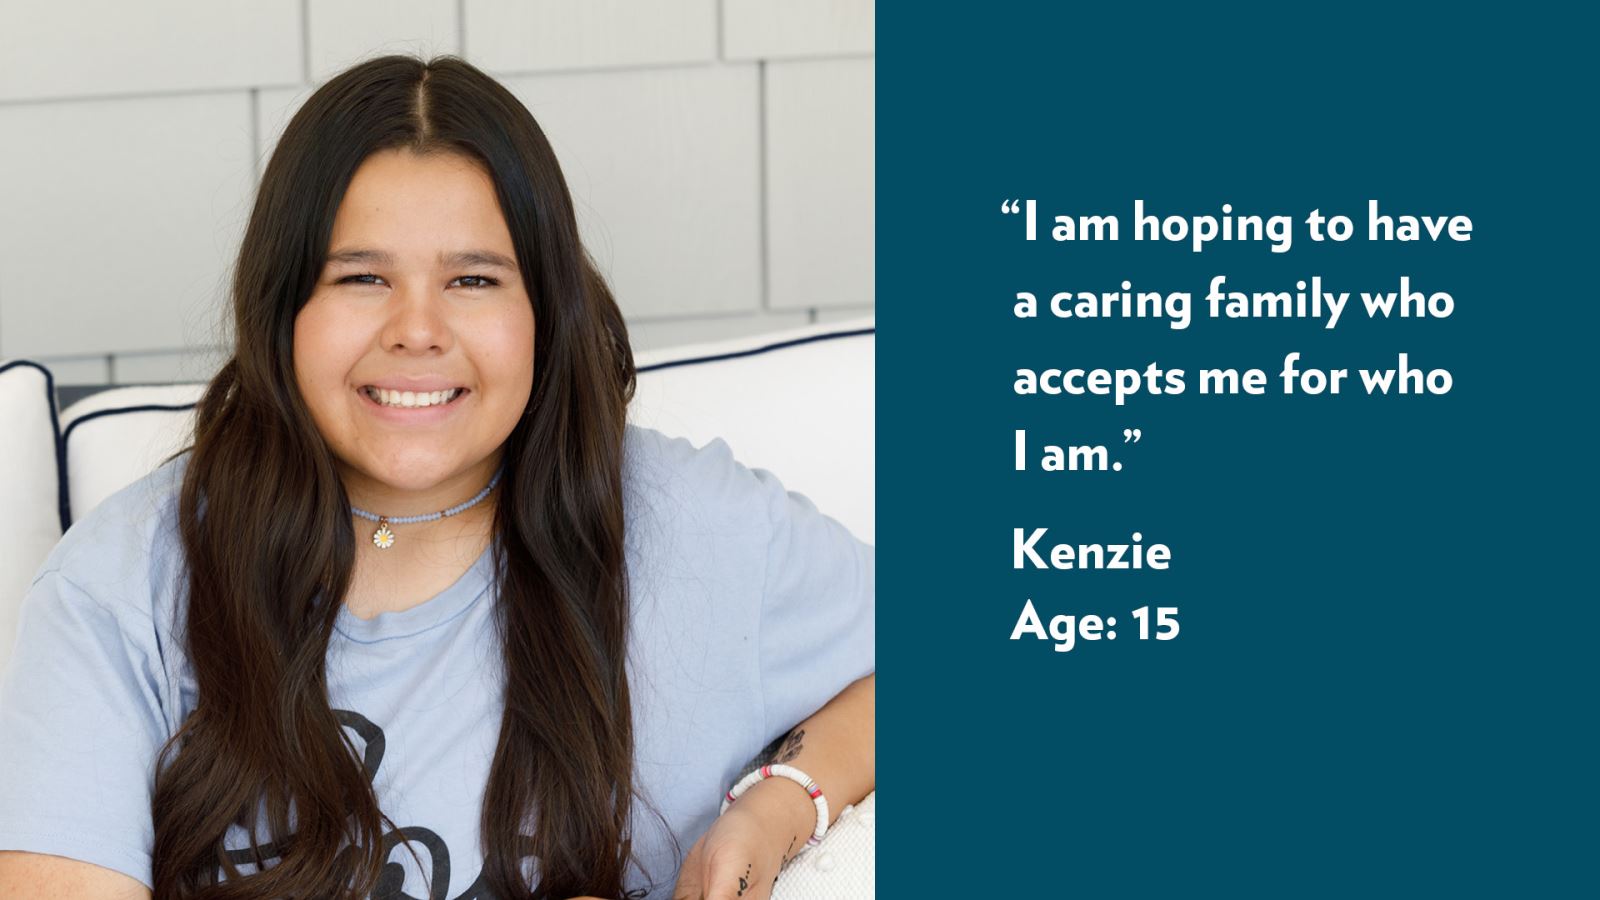 I am hoping to have a caring family who accepts me for who I am. Kenzie, age 15. View profile.